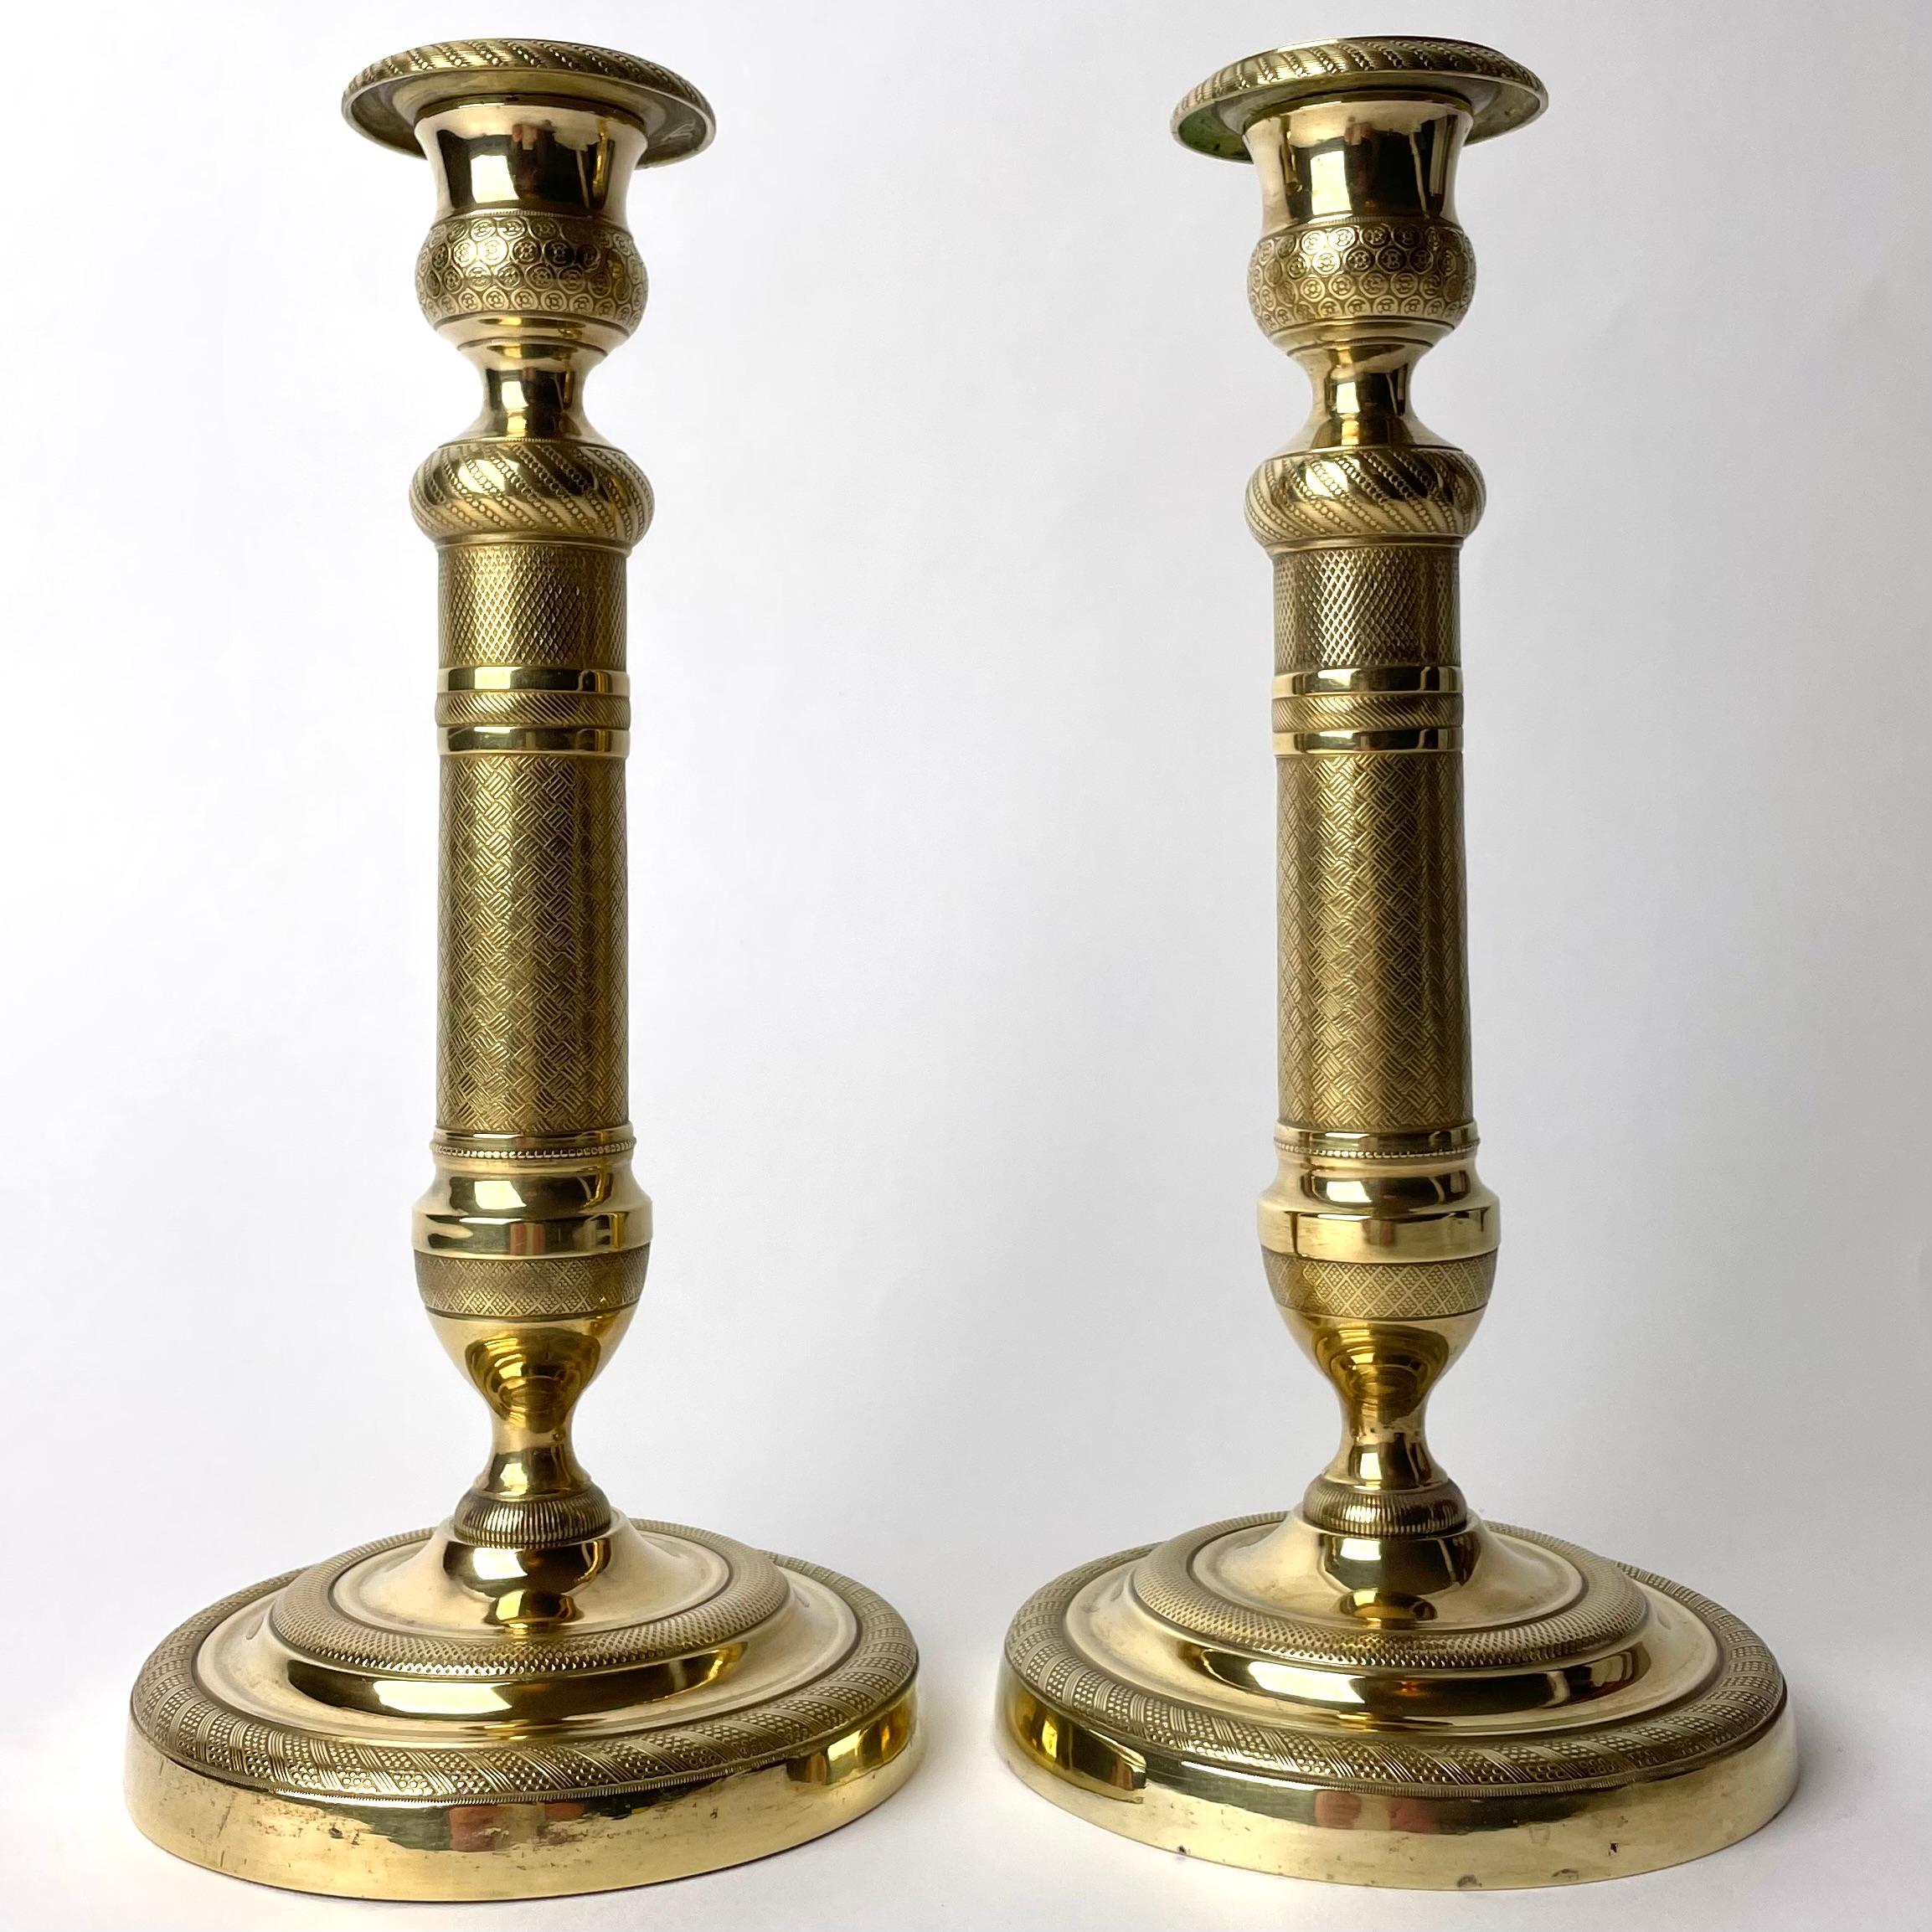 Elegant pair of Empire Candlesticks in gilt bronze. Made in France during the 1820s. Richly decorated in period decorations.

Wear consistent with age and use